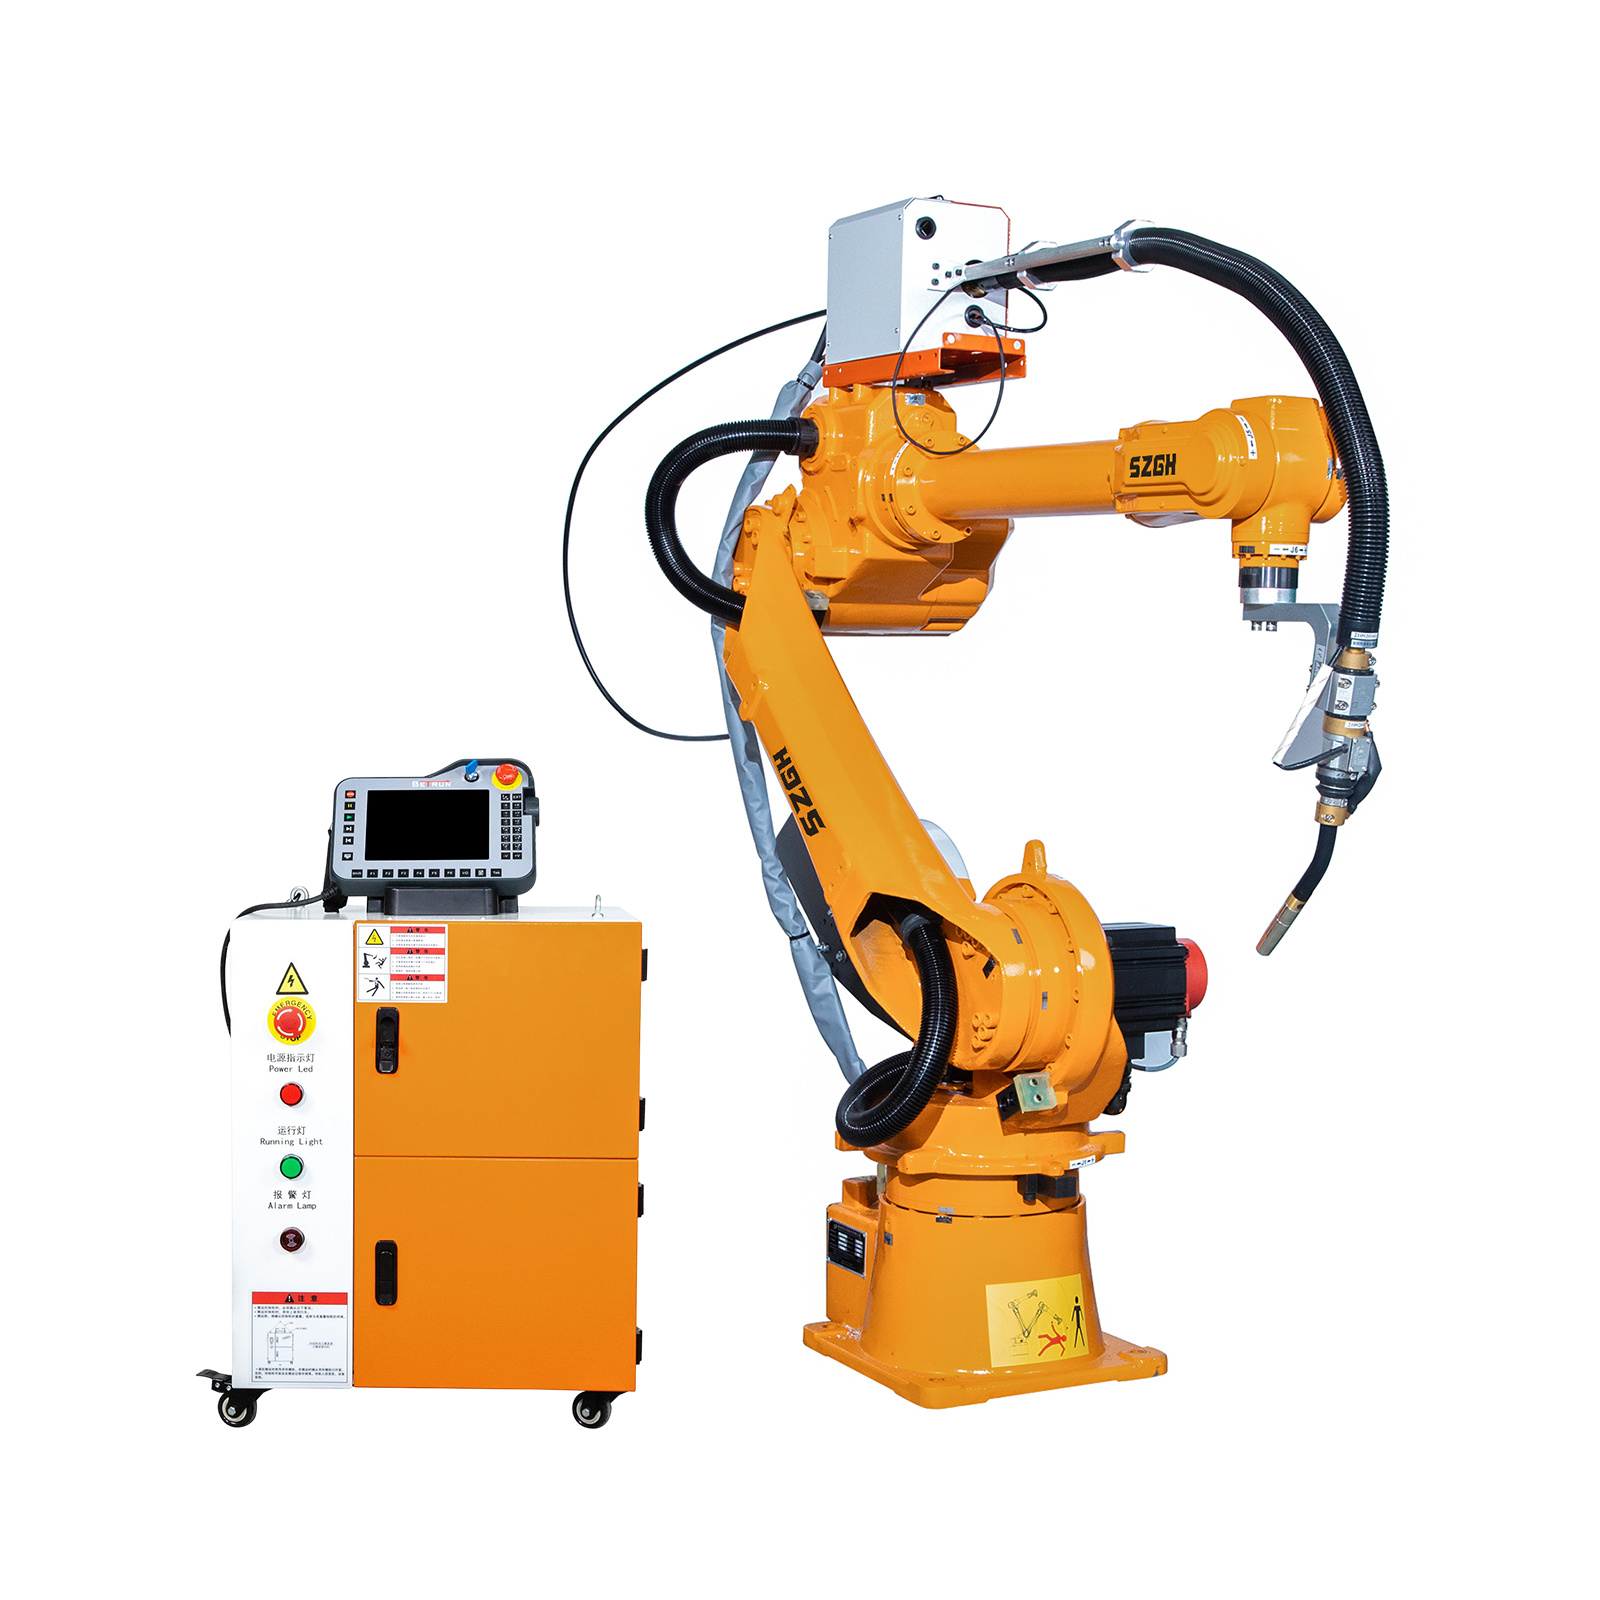 What is a welding robot? What are its characteristics?